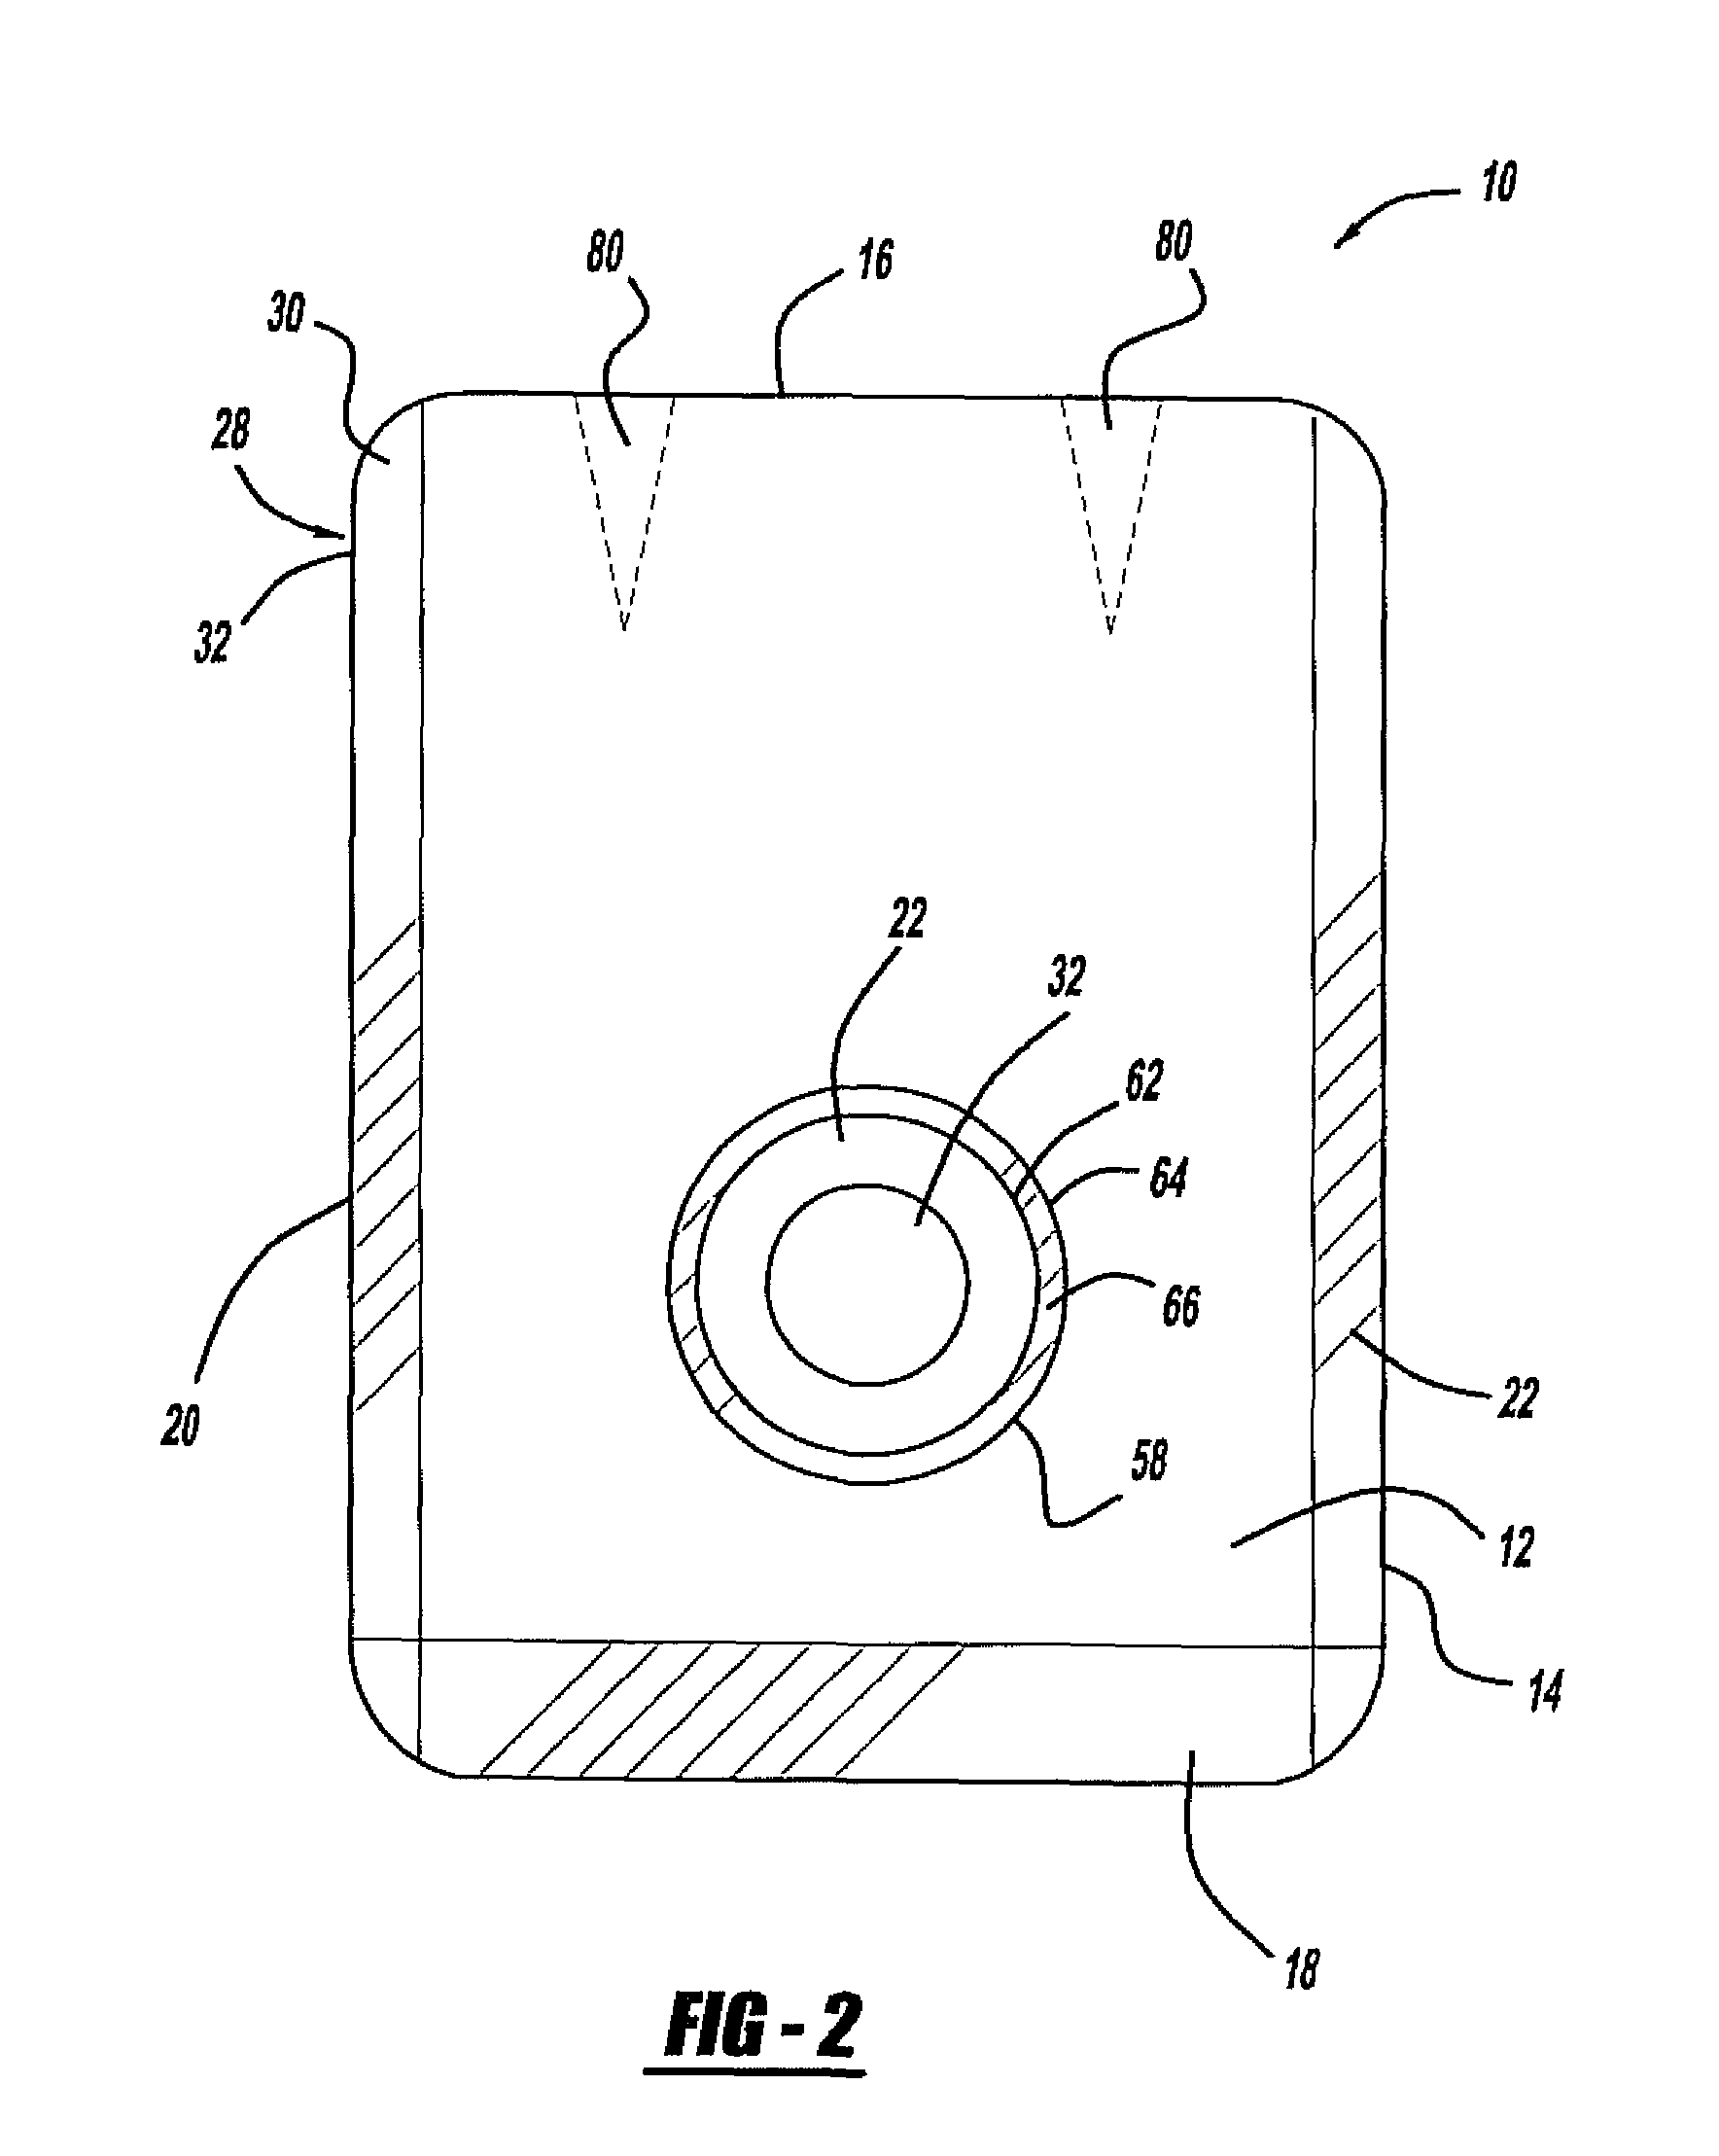 Automated machine and method for mounting a fitment to a flexible pouch